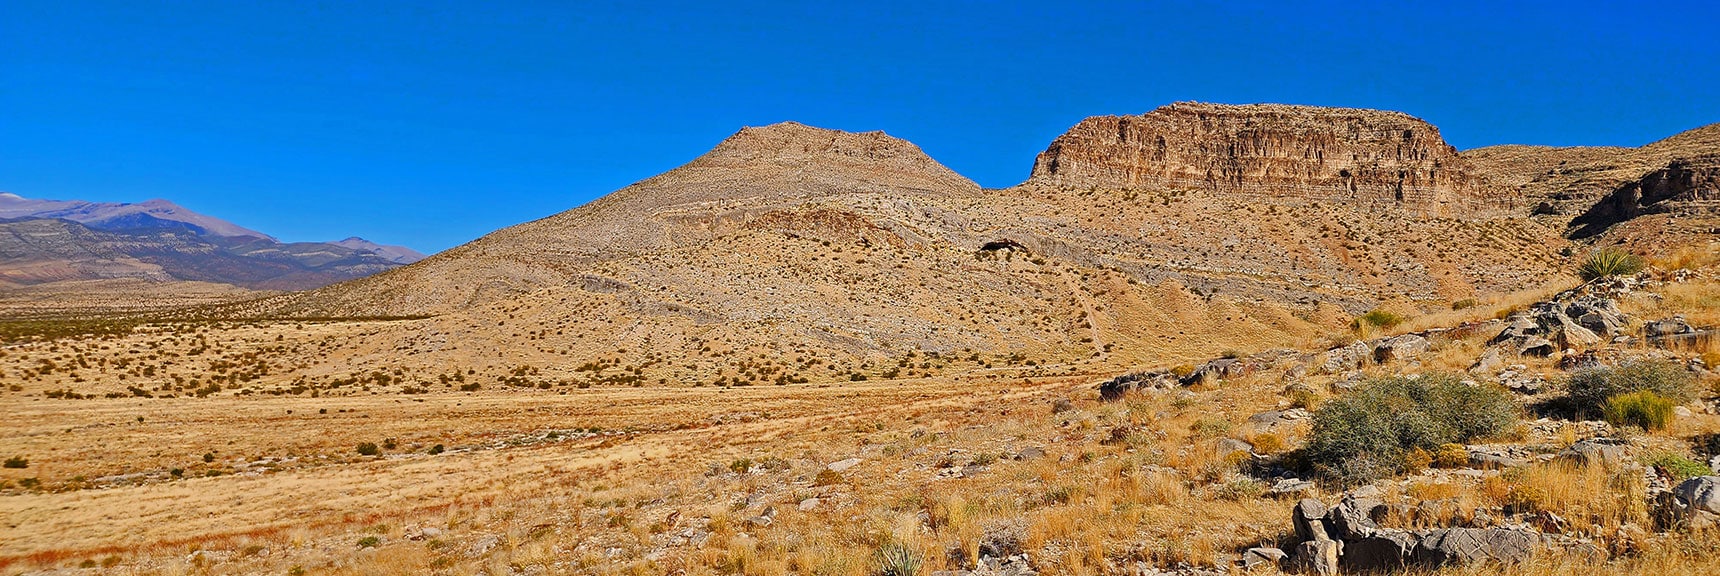 Note the Large Cave on Canyon's North Side | Landmark Bluff | Lovell Canyon, Nevada